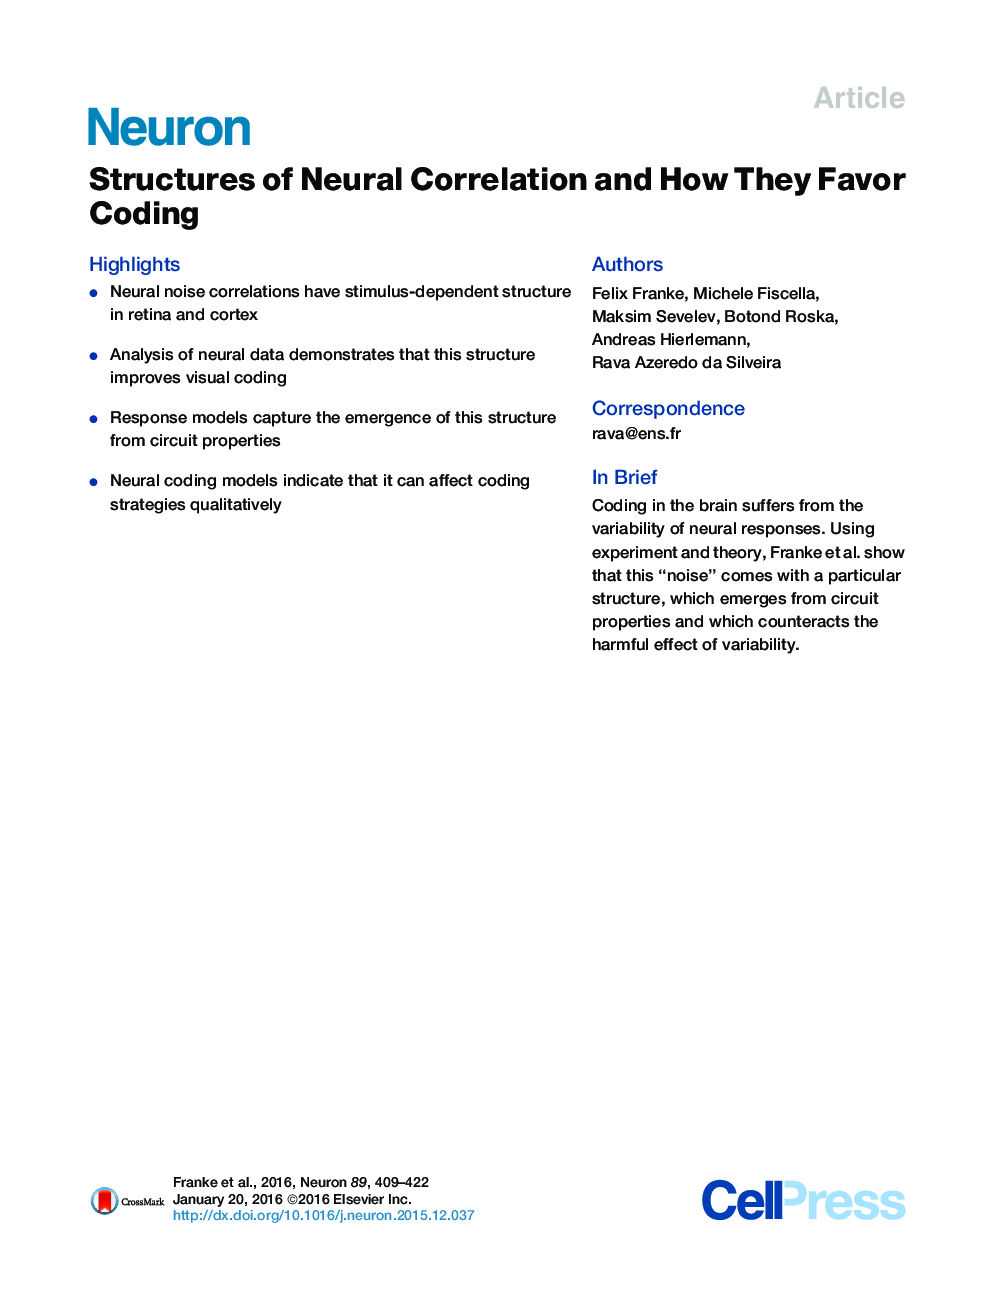 Structures of Neural Correlation and How They Favor Coding